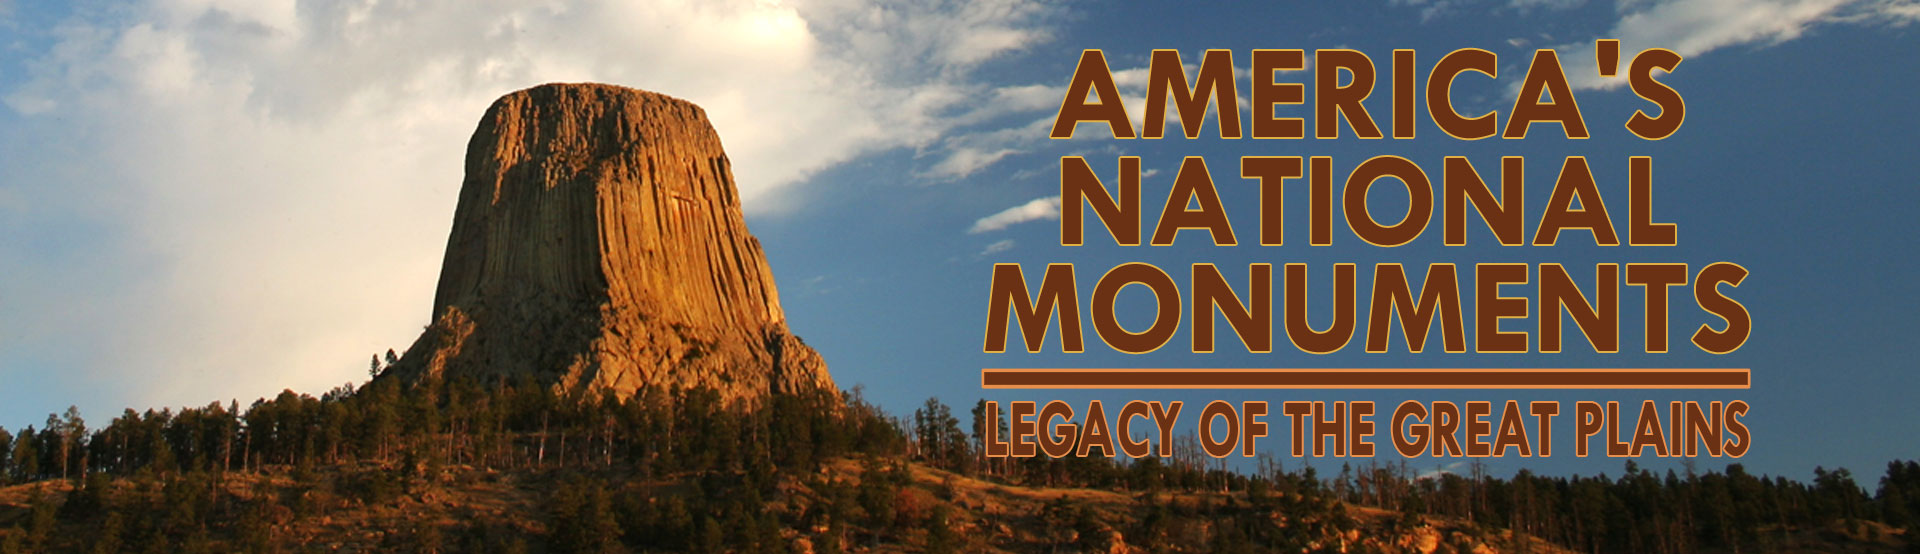 America's National Monuments: Legacy Of The Great Plains